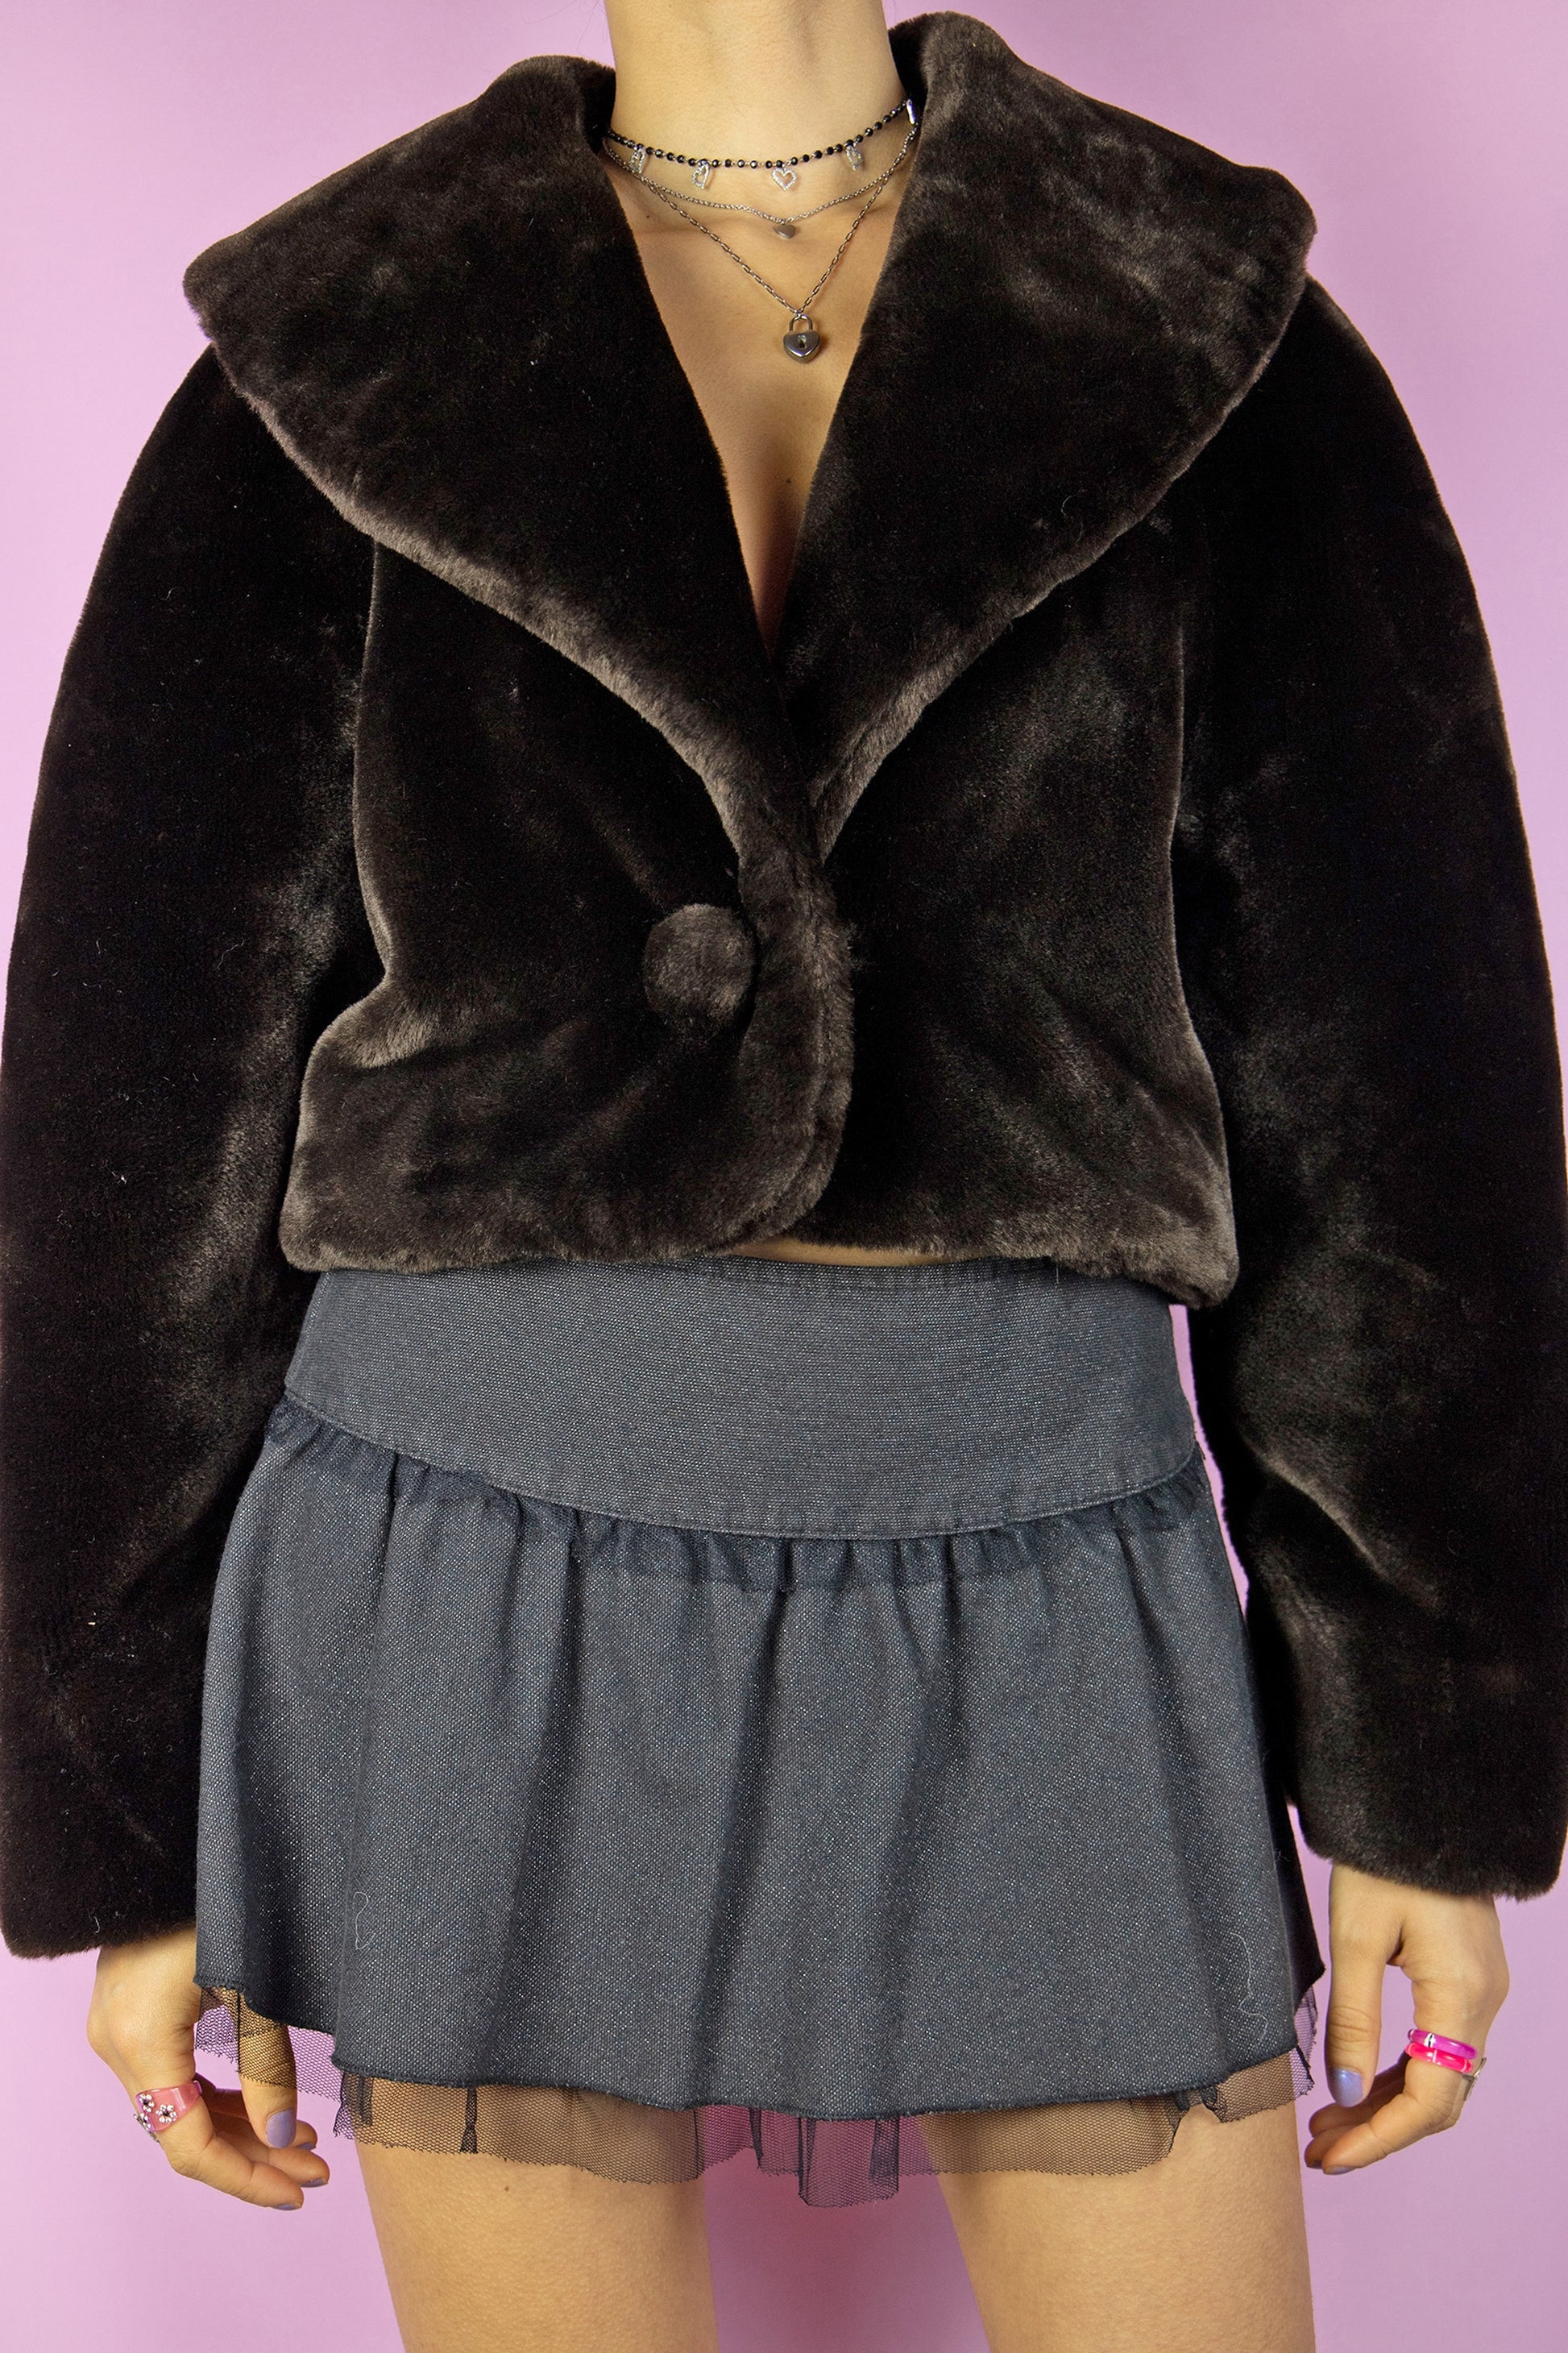 The Vintage 90s Brown Faux Fur Cropped Jacket is a dark brown winter statement bolero coat featuring a collar and a secure hook closure.